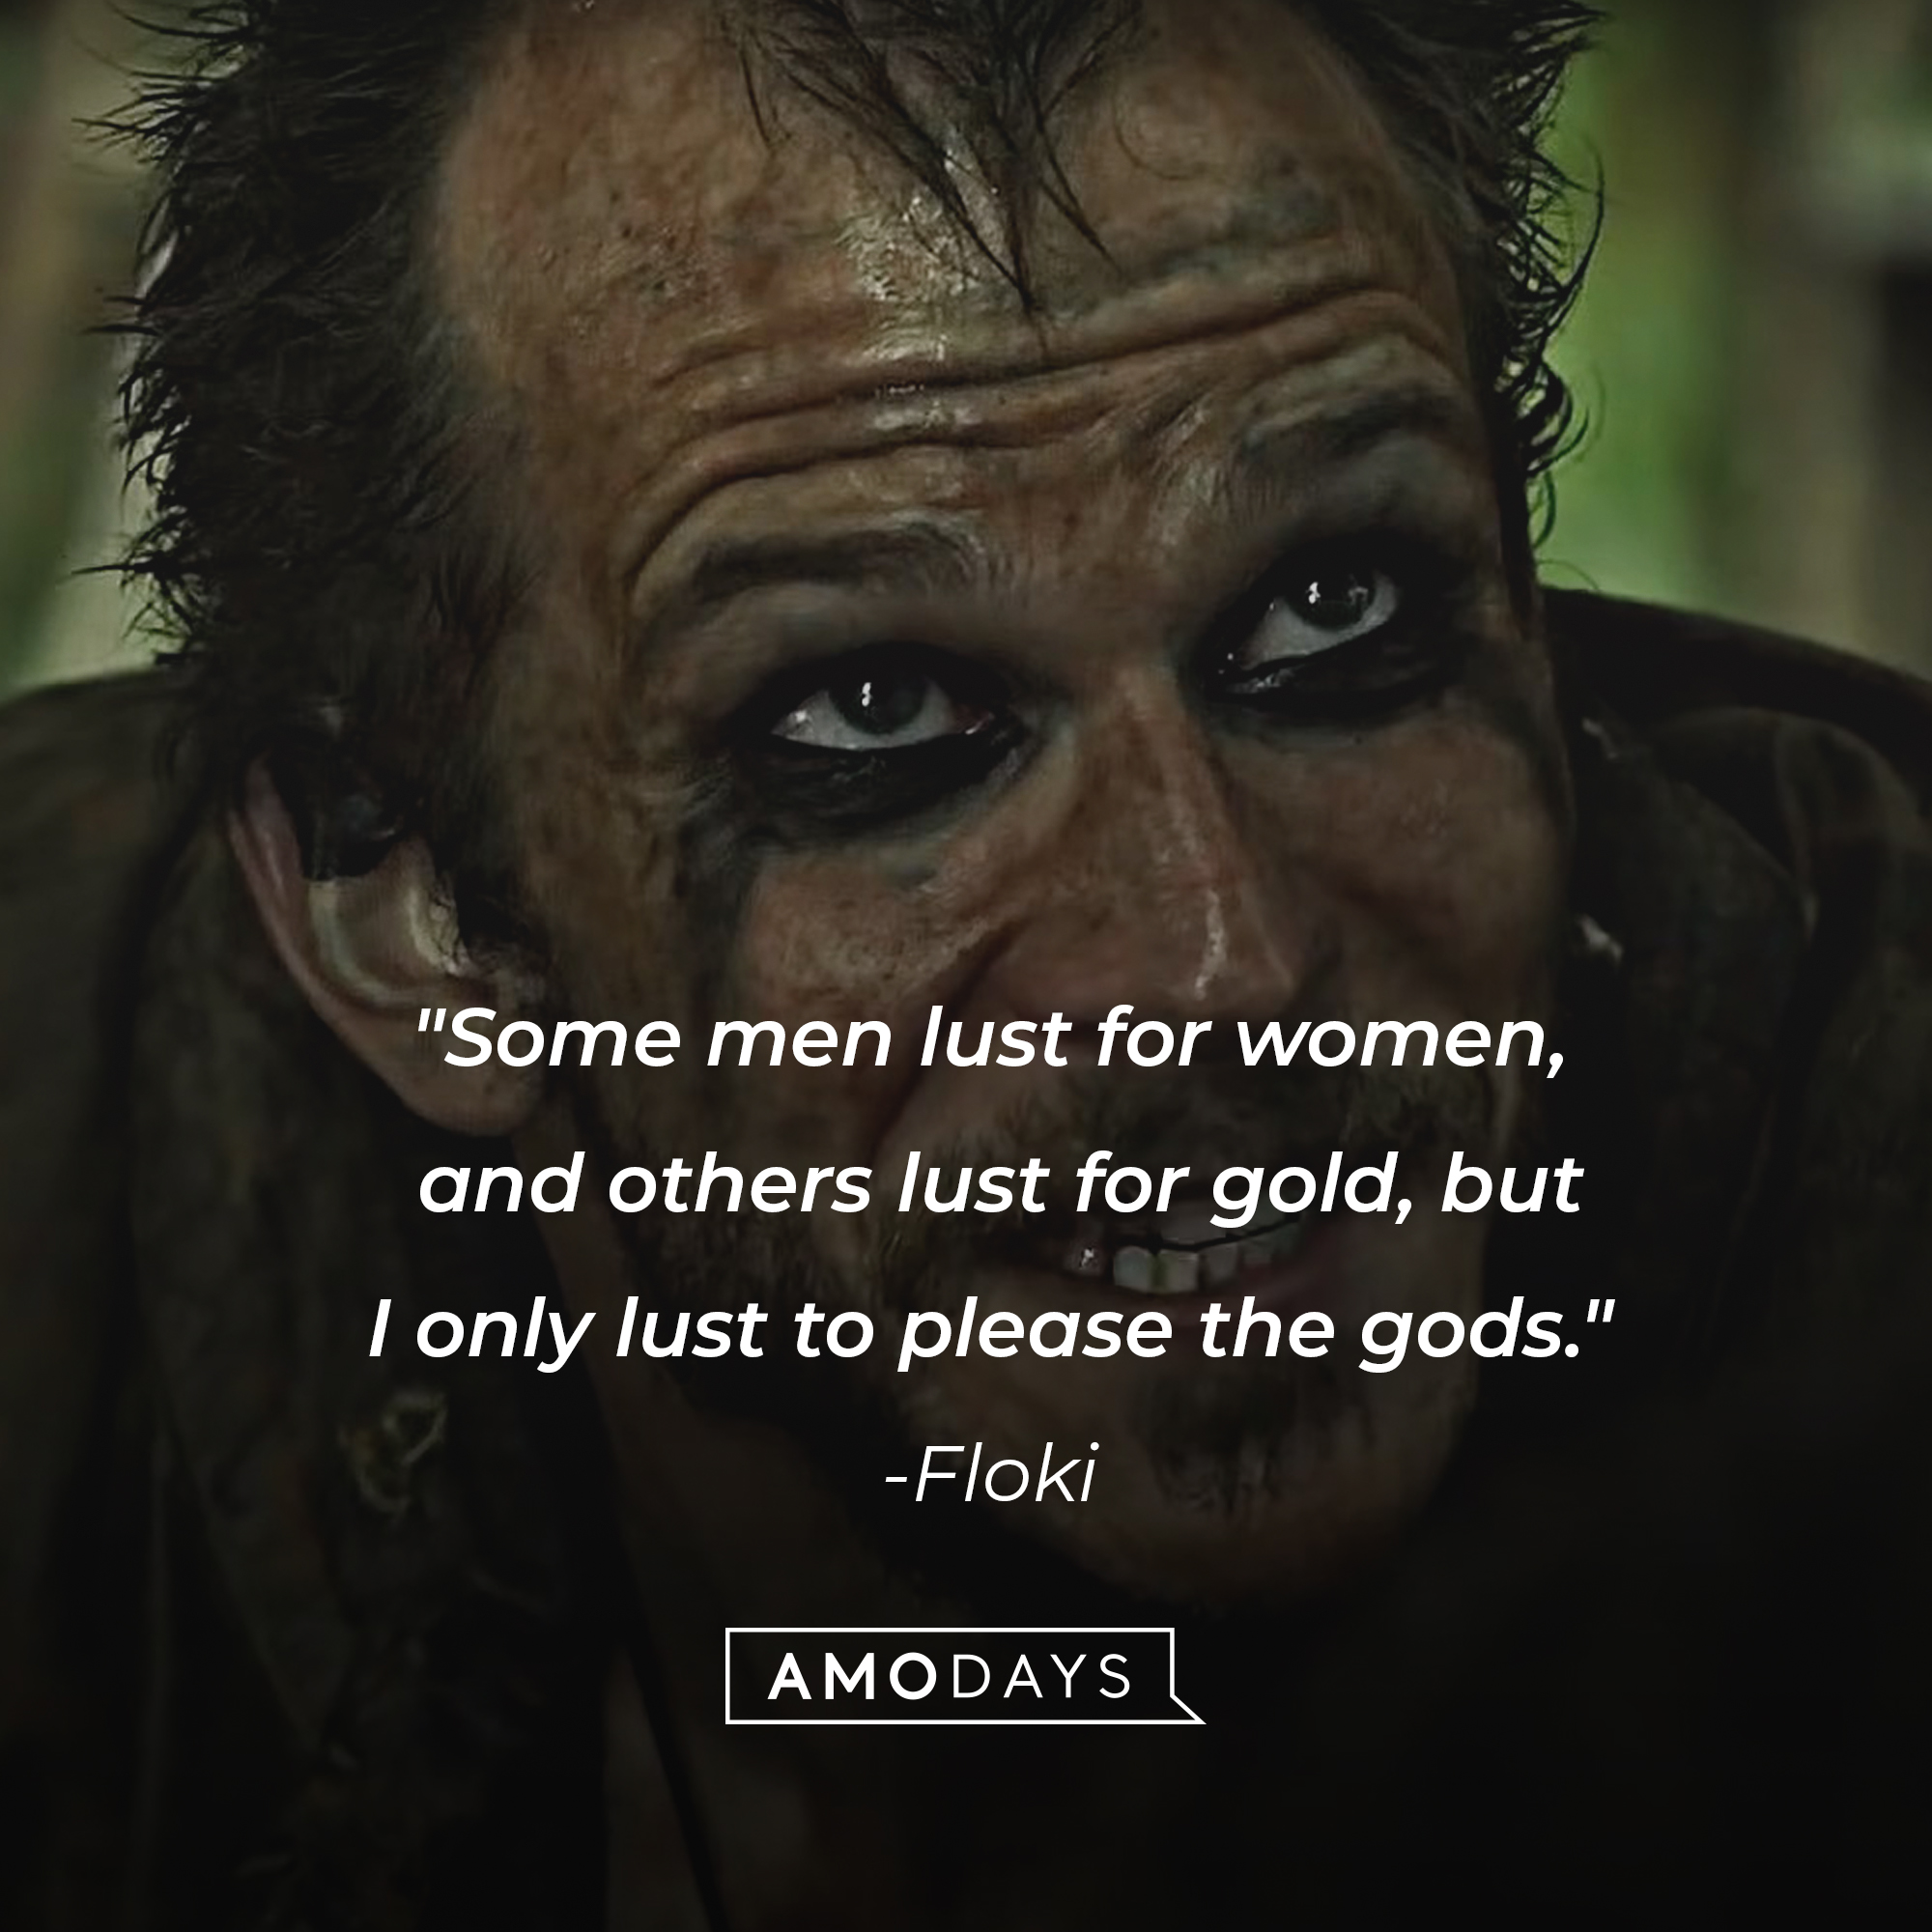 An image of Floki with his quote: "Some men lust for women, and others lust for gold, but I only lust to please the gods." | Source:  facebook.com/Vikings